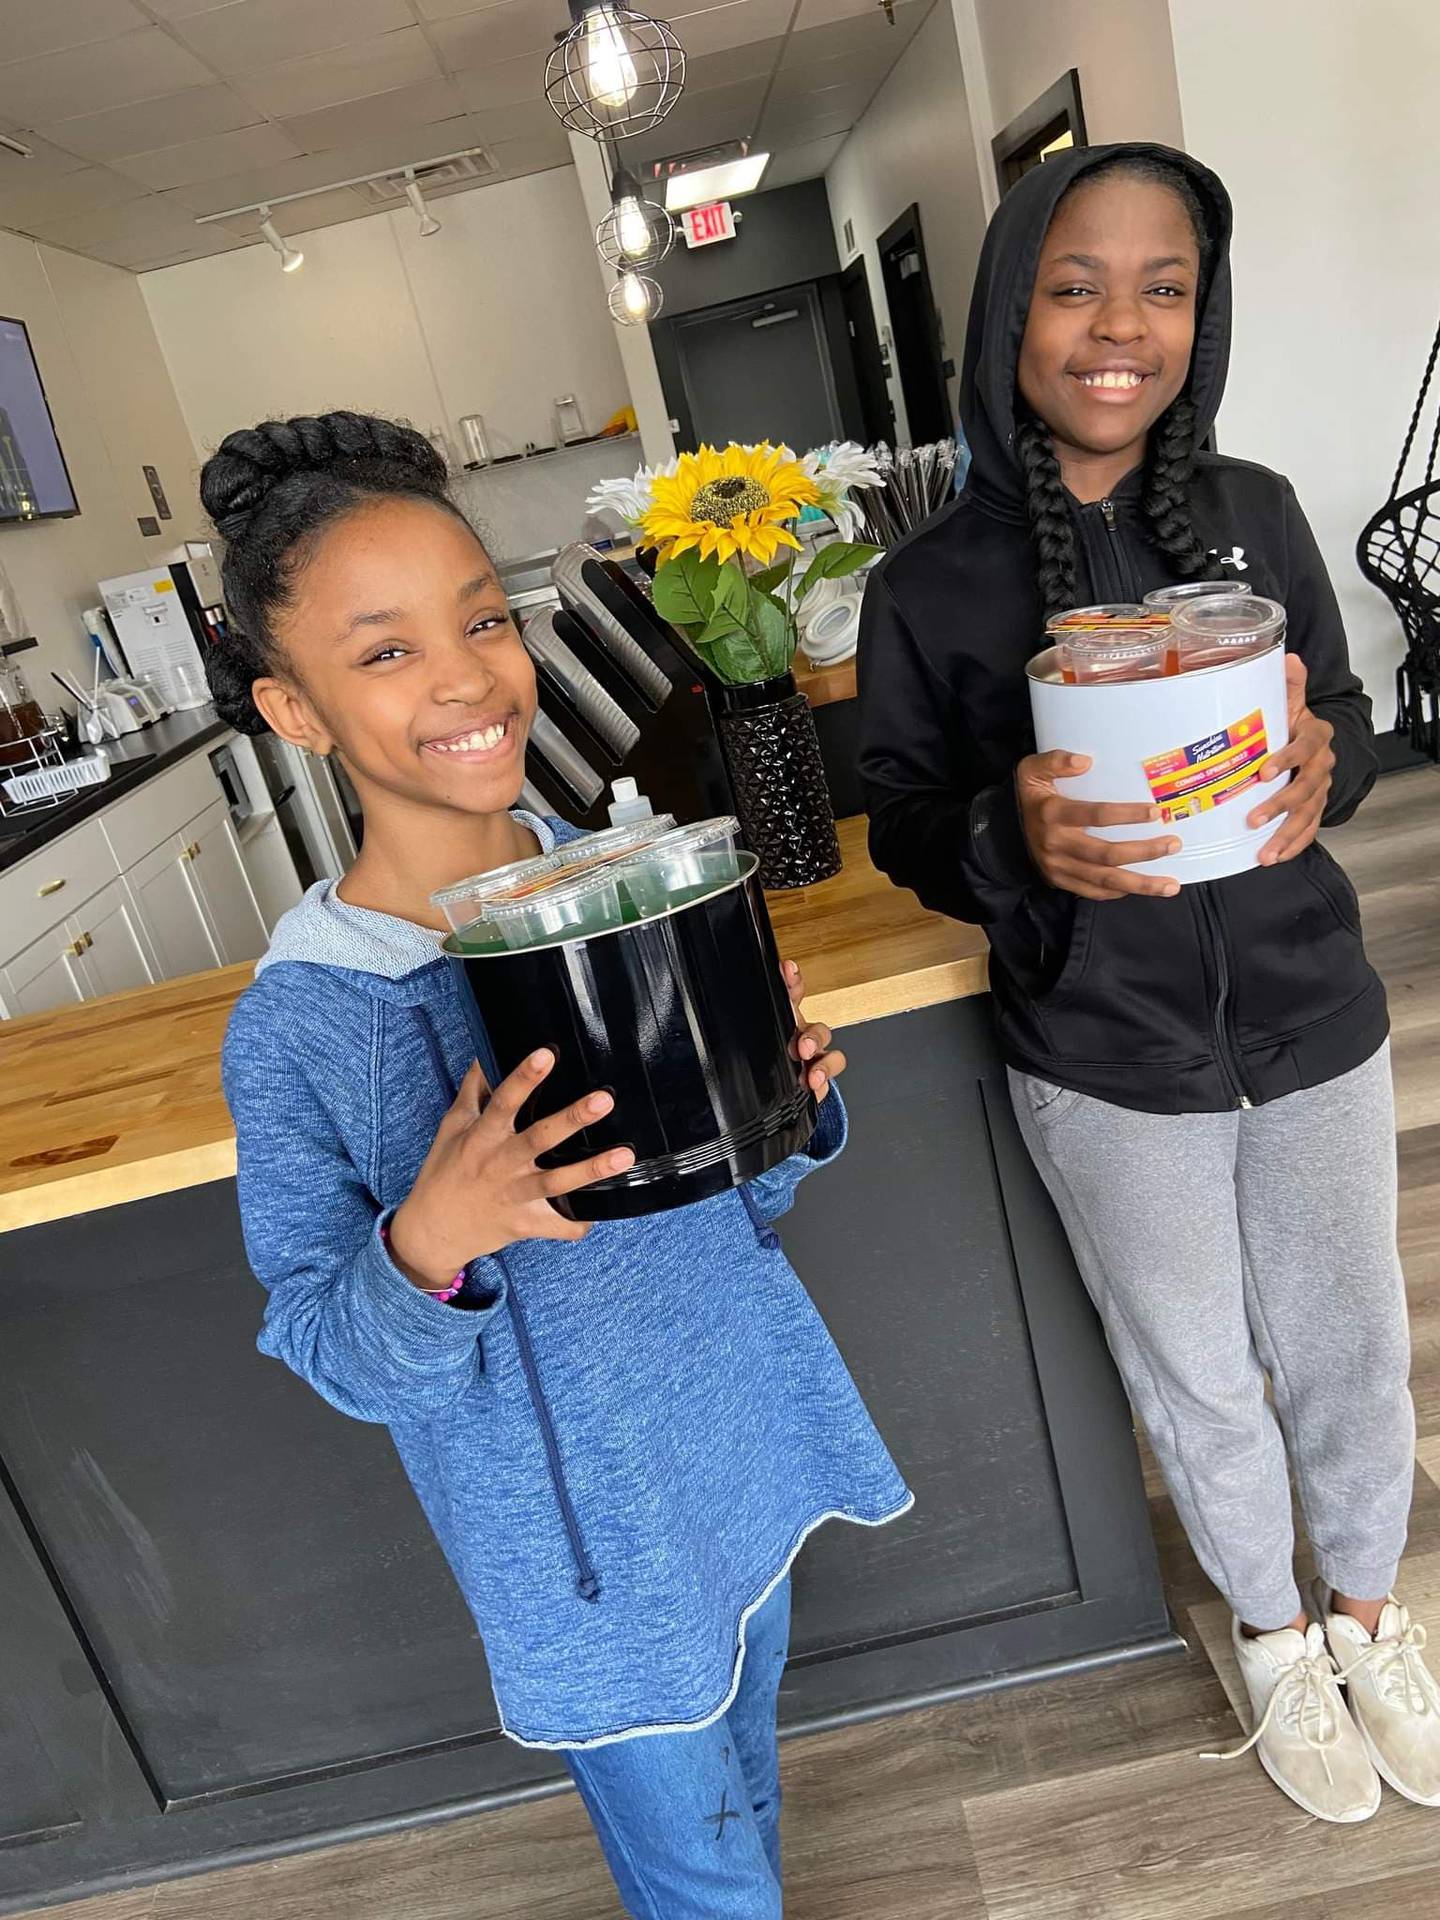 Sunshine Nutrition in New Lenox offers a smoothie juice bar with nutritional choices: healthy shakes, smoothies and teas, The owners are Lucky and Terry Collins of Steger. Their daughters 
Harmony Collins and Serenity Collins show off some of the store's products.